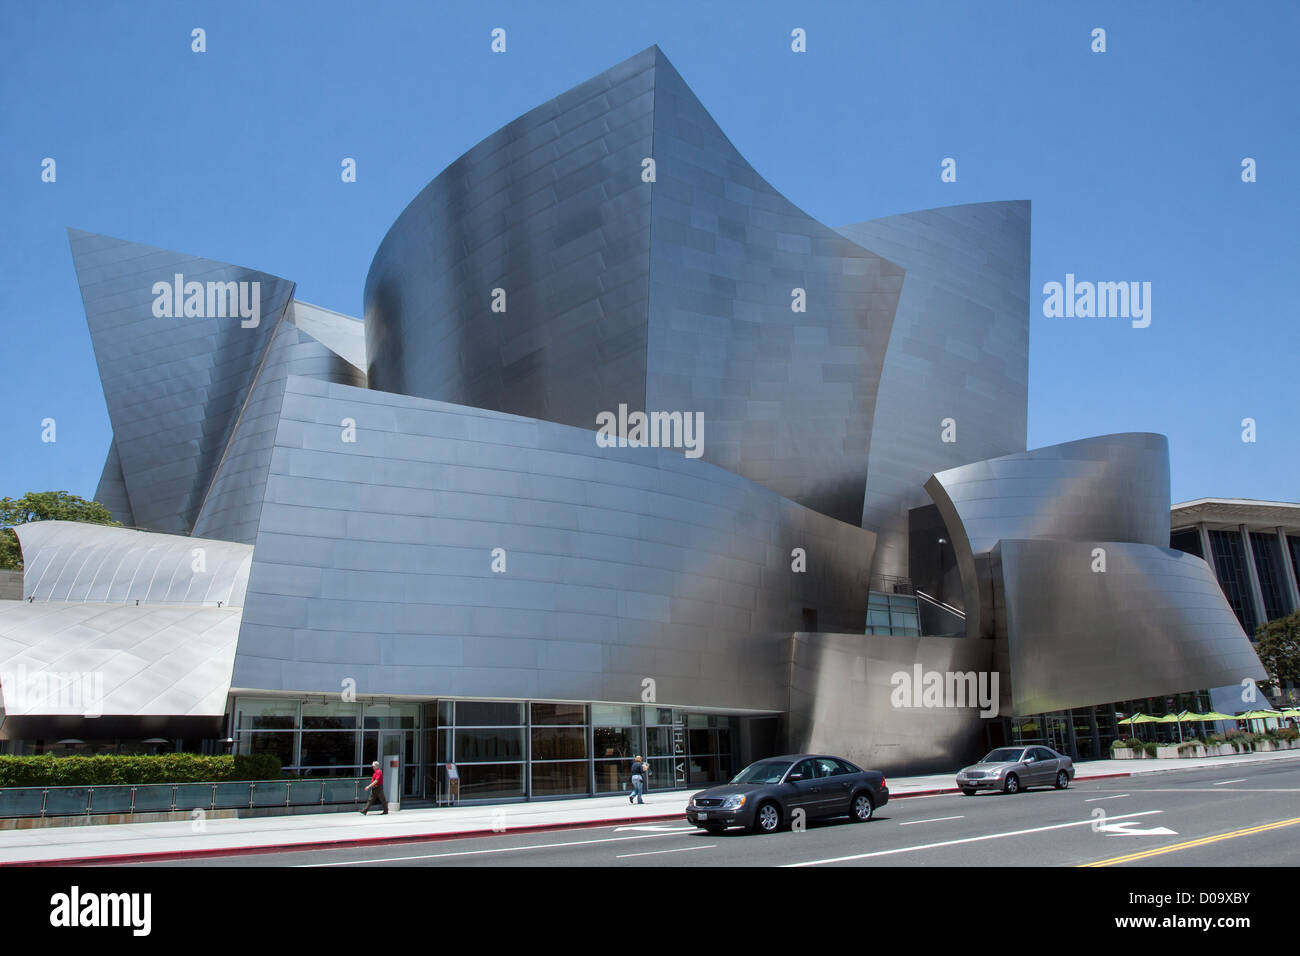 EXTERIOR WALT DISNEY CONCERT HALL BUILT AMERICAN ARCHITECT FRANK GEHRY DOWNTOWN LOS ANGELES CALIFORNIA UNITED STATES USA Stock Photo